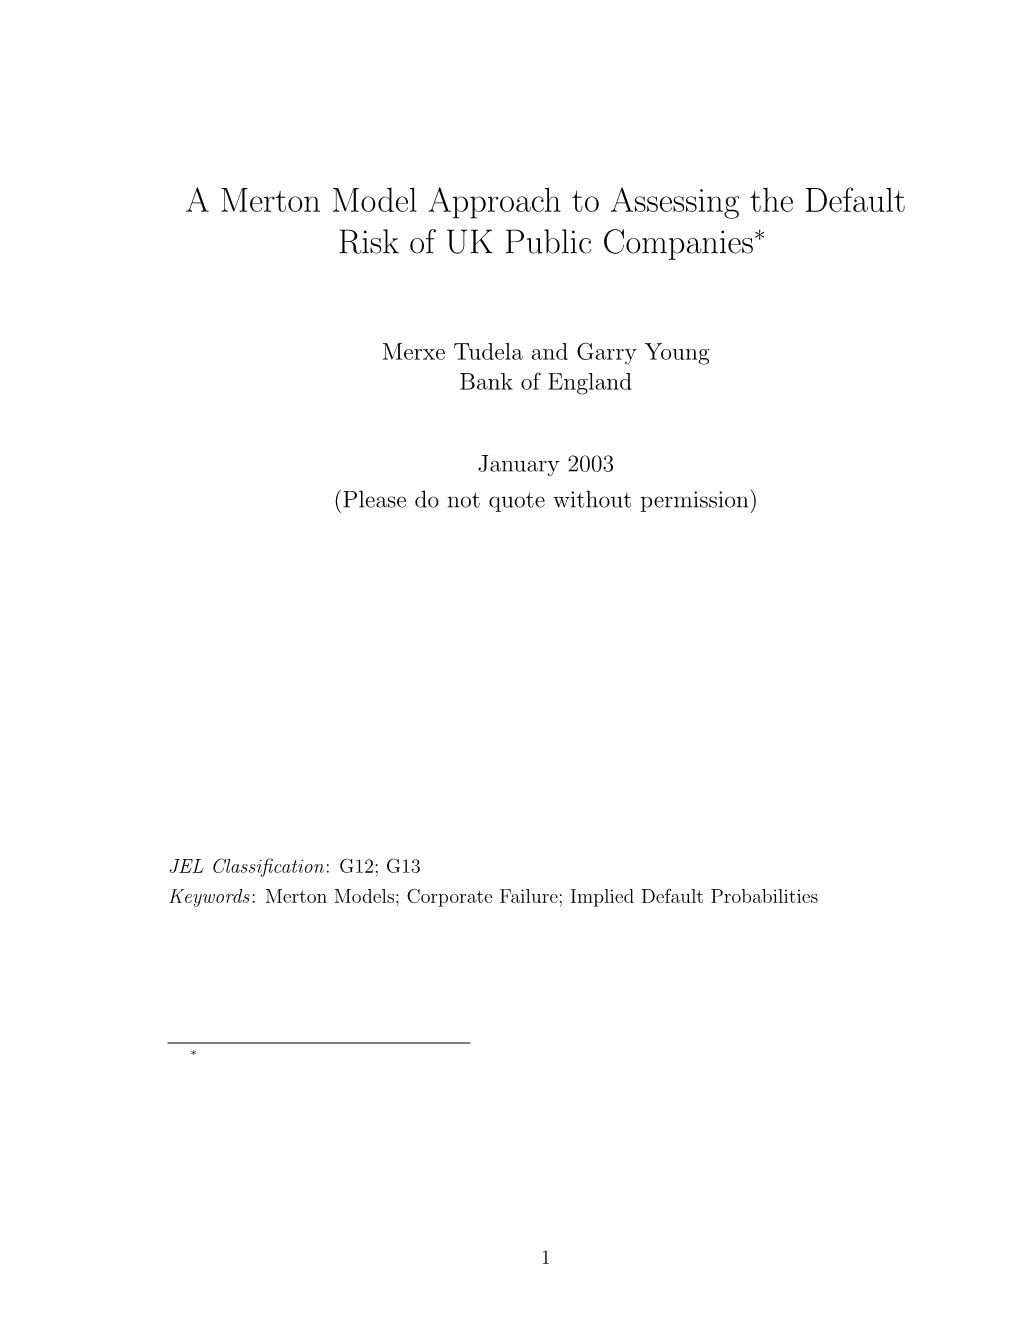 A Merton Model Approach to Assessing the Default Risk of UK Public Companies∗